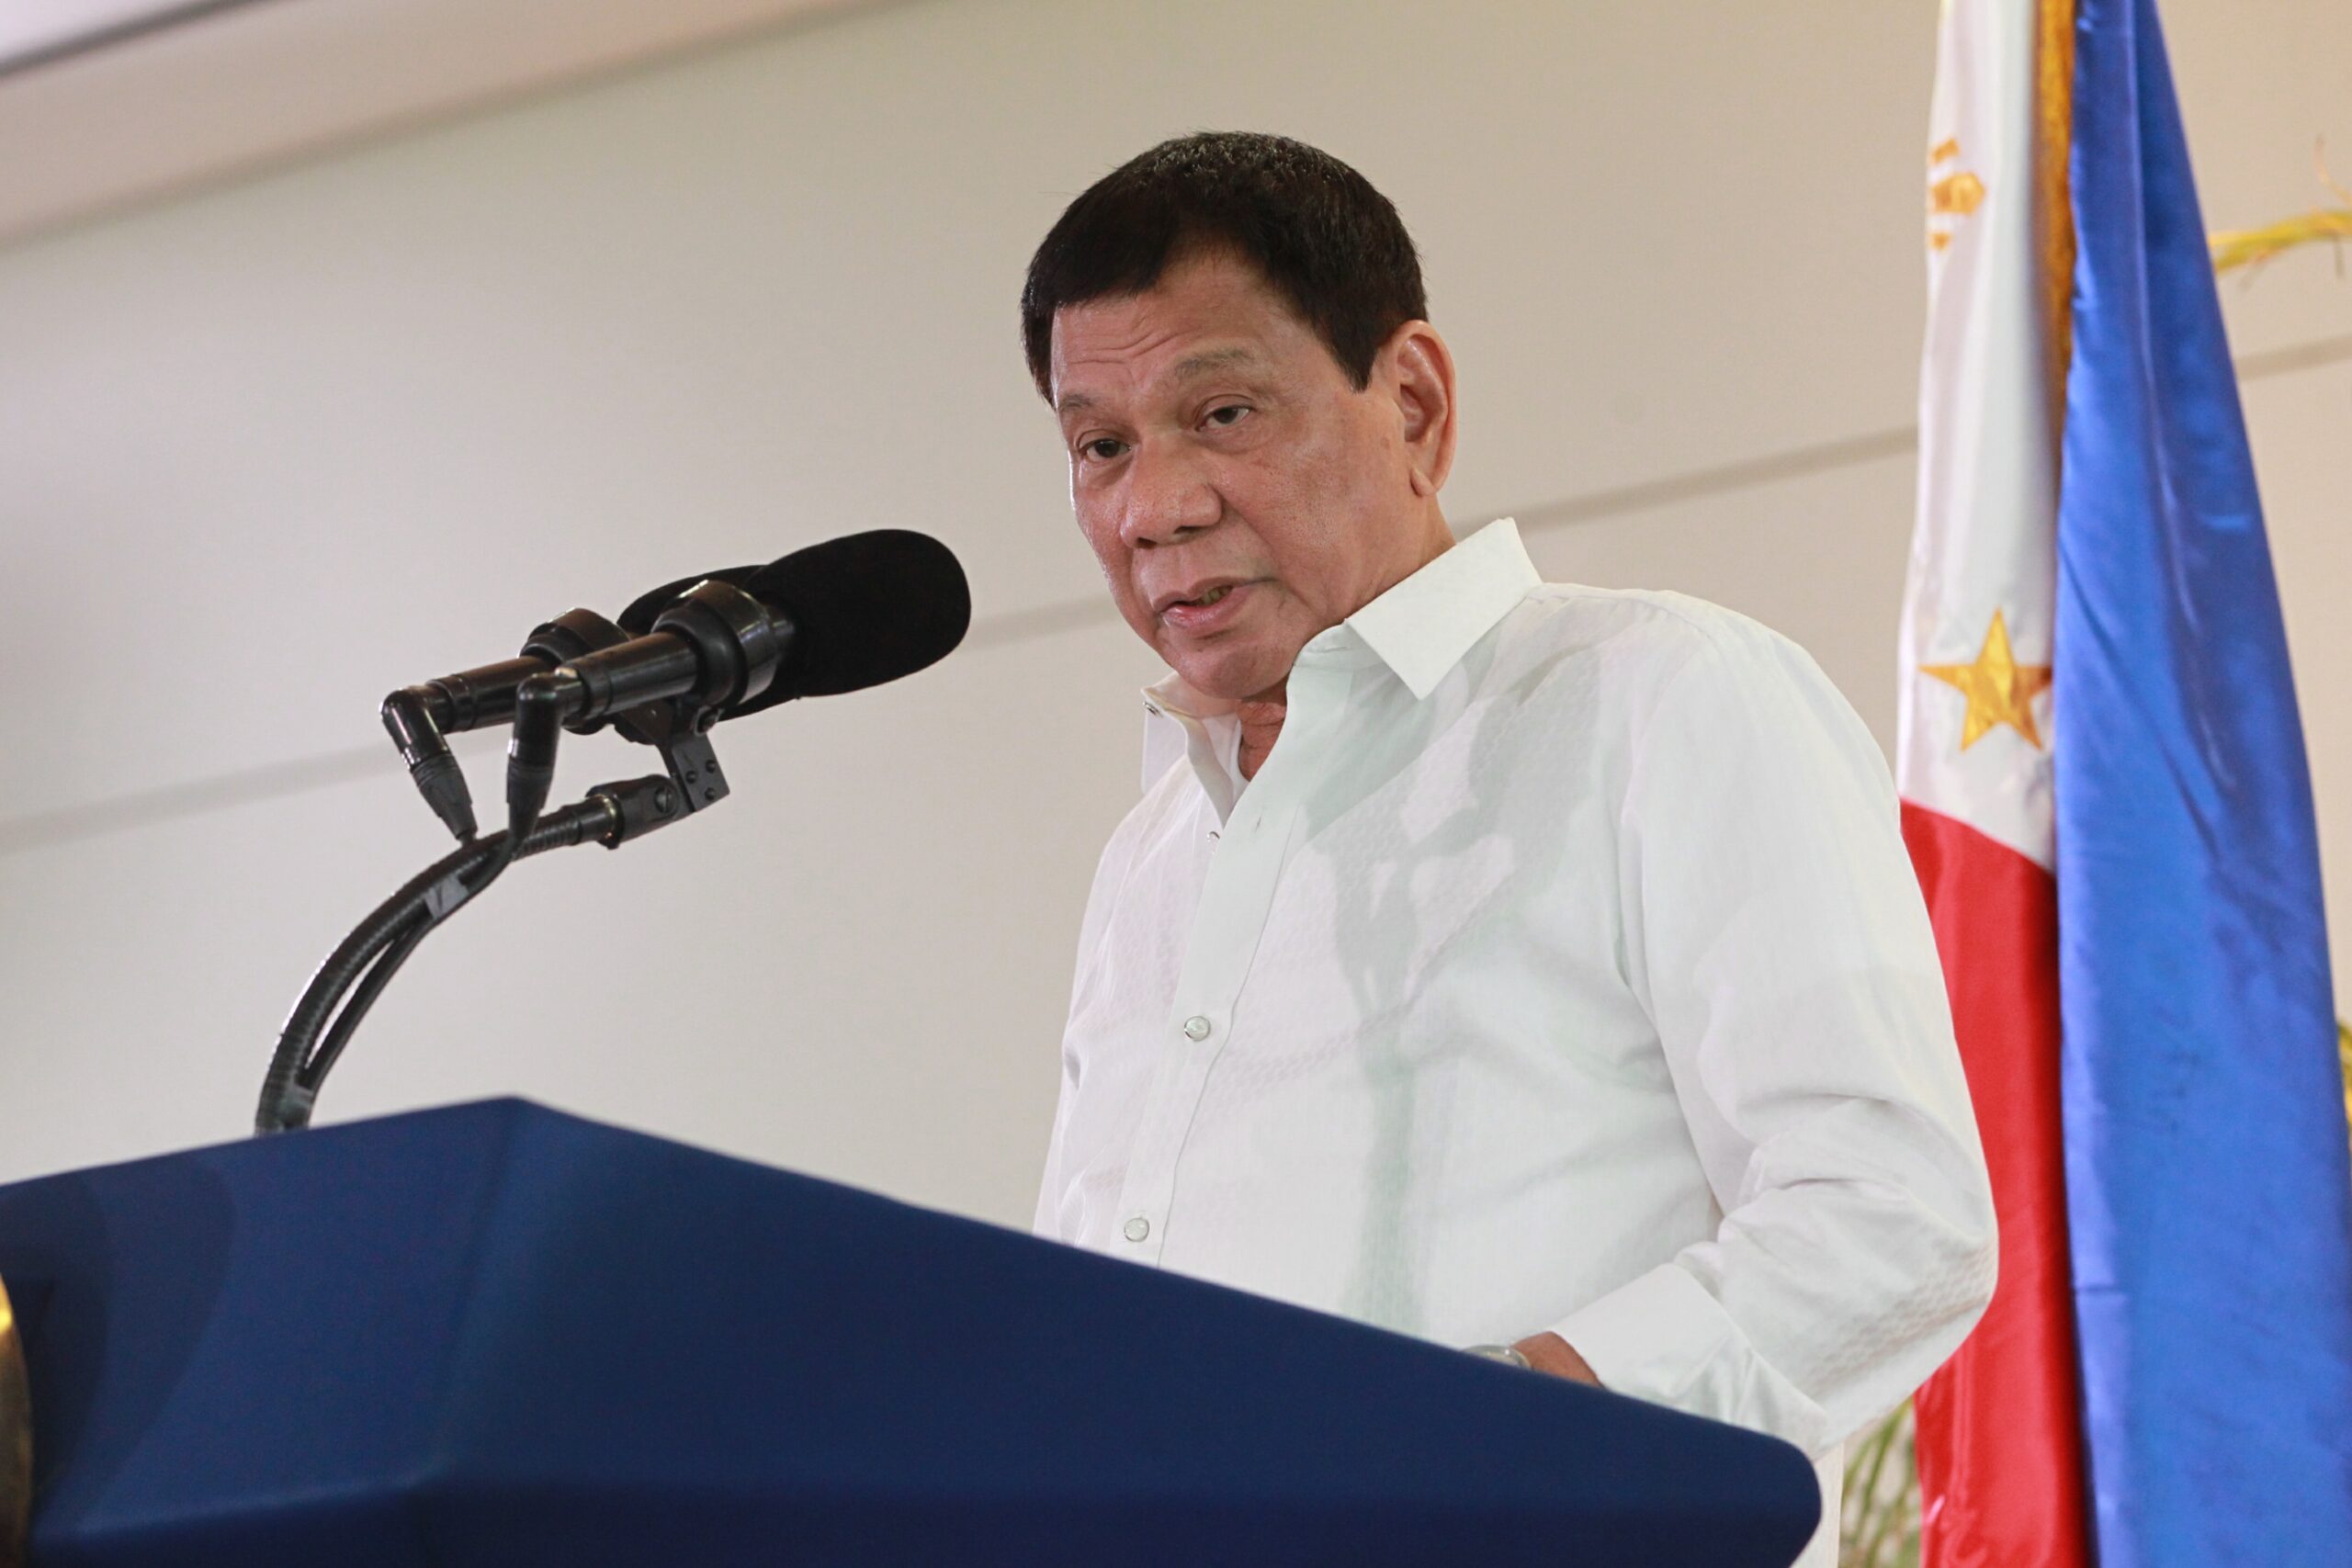 Duterte on Marcos burial: Let history judge, I followed law